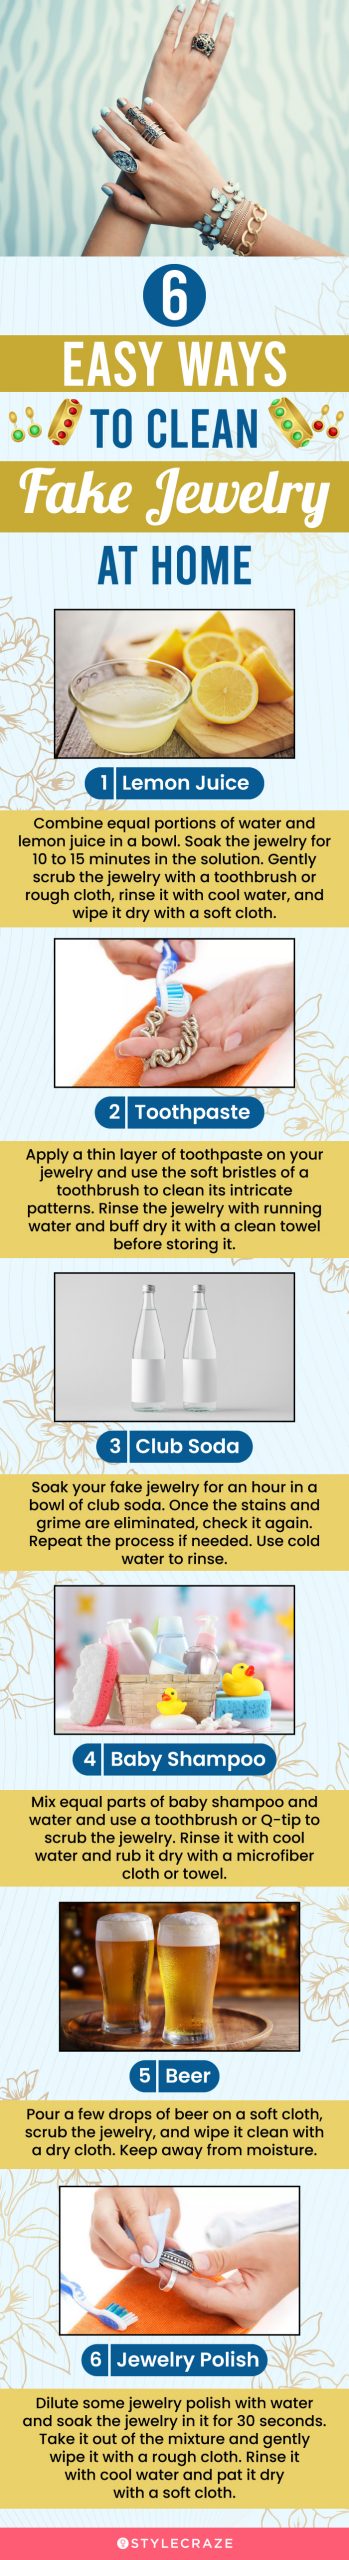 6 easy ways to clean fake jewelry at home (infographic)